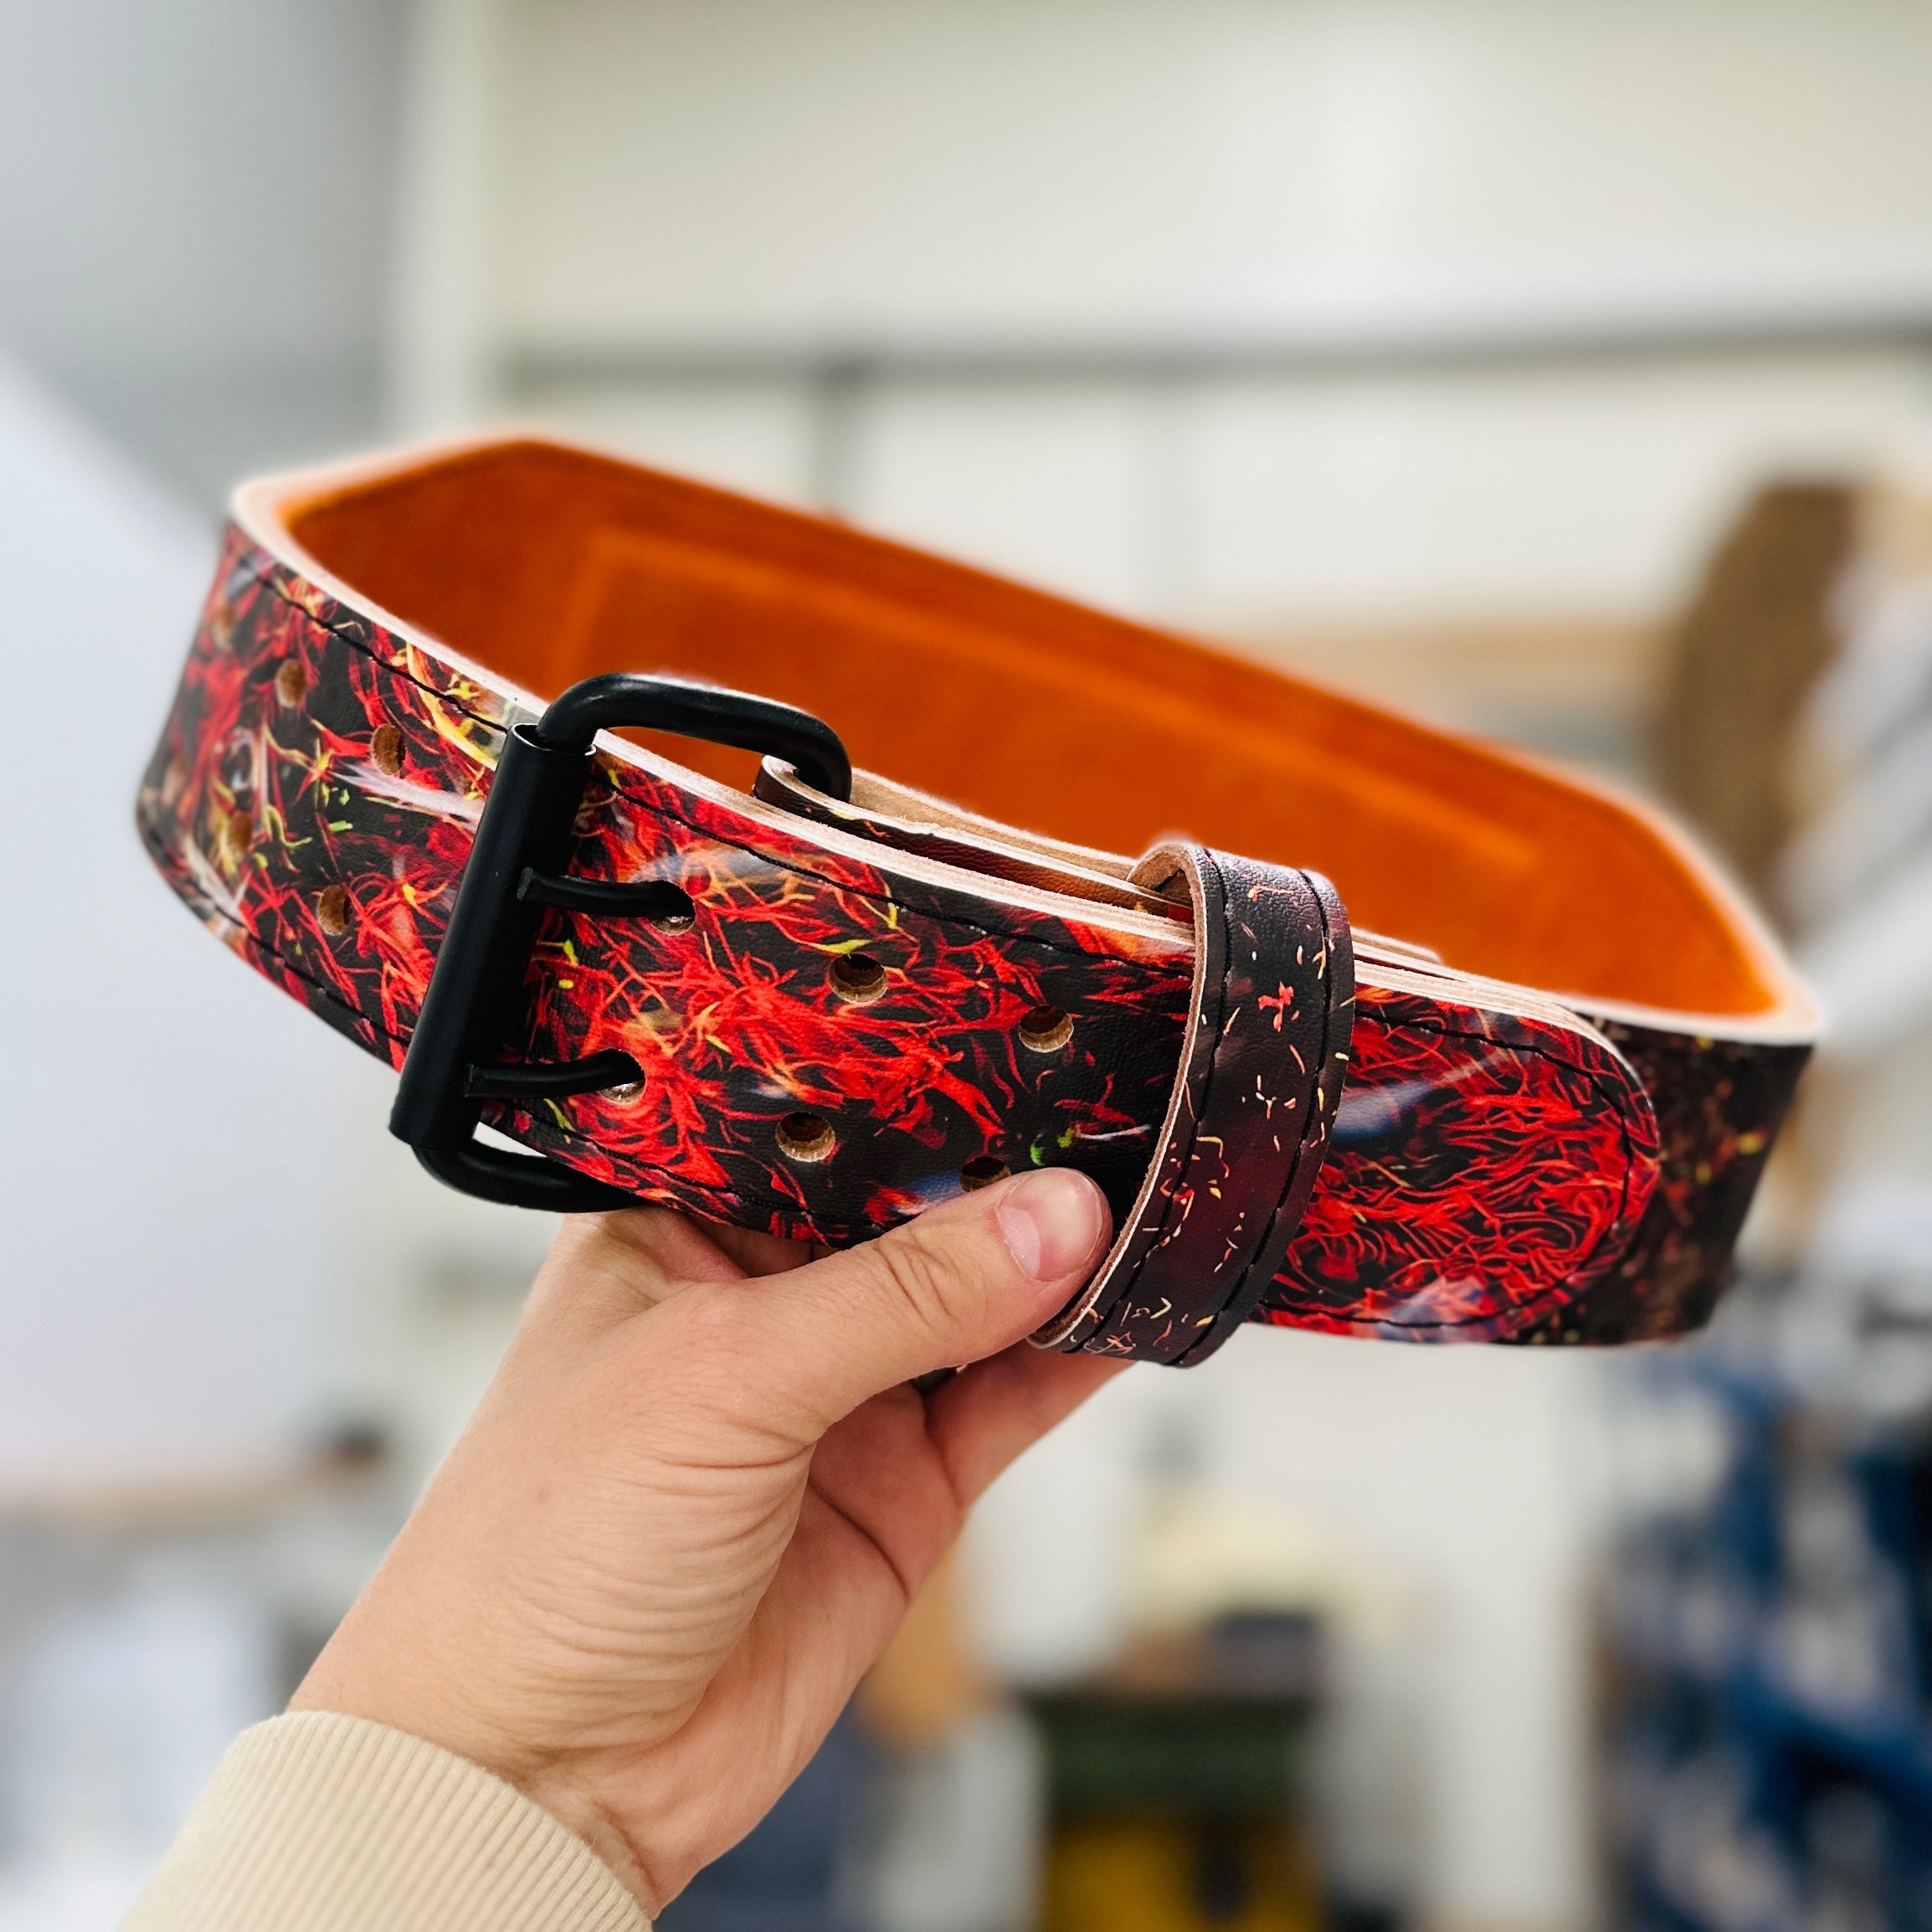 DISCONTINUED Limited Edition Kyojuro Rengoku Anime Weightlifting Belt - Hand Made in UK - M & XL ONLY